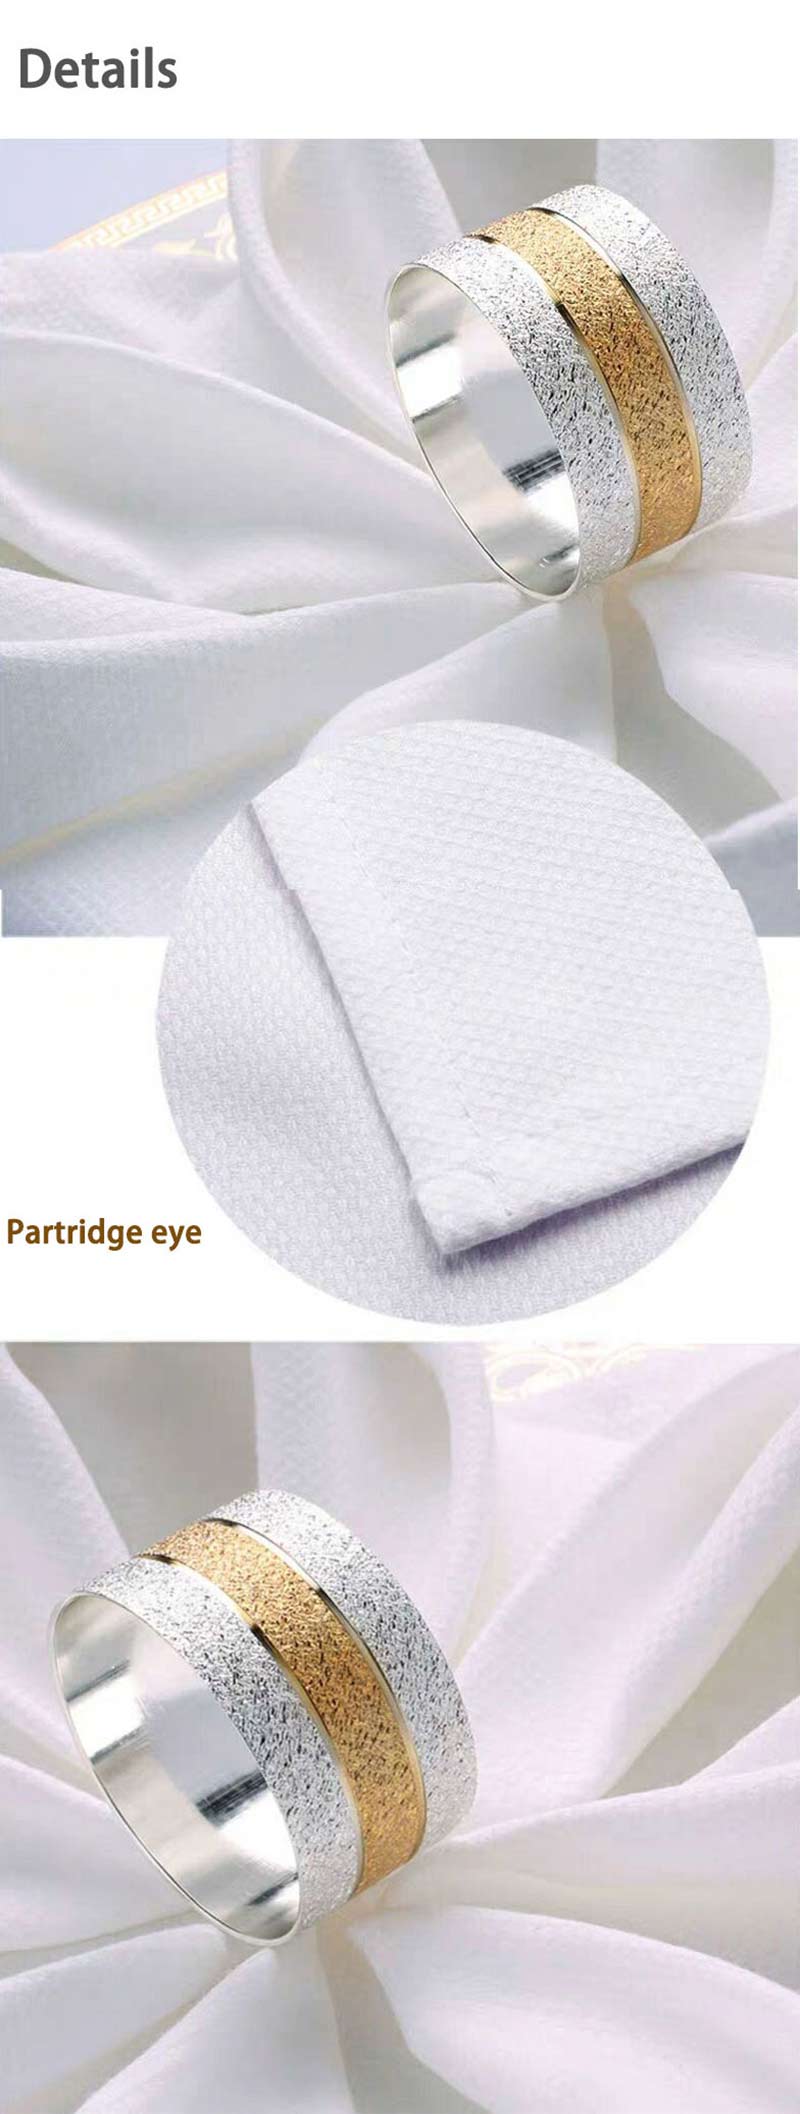 high quality plain satin 100% cotton white napkins 22x22inch for hotel use/wedding use/dinner use 7